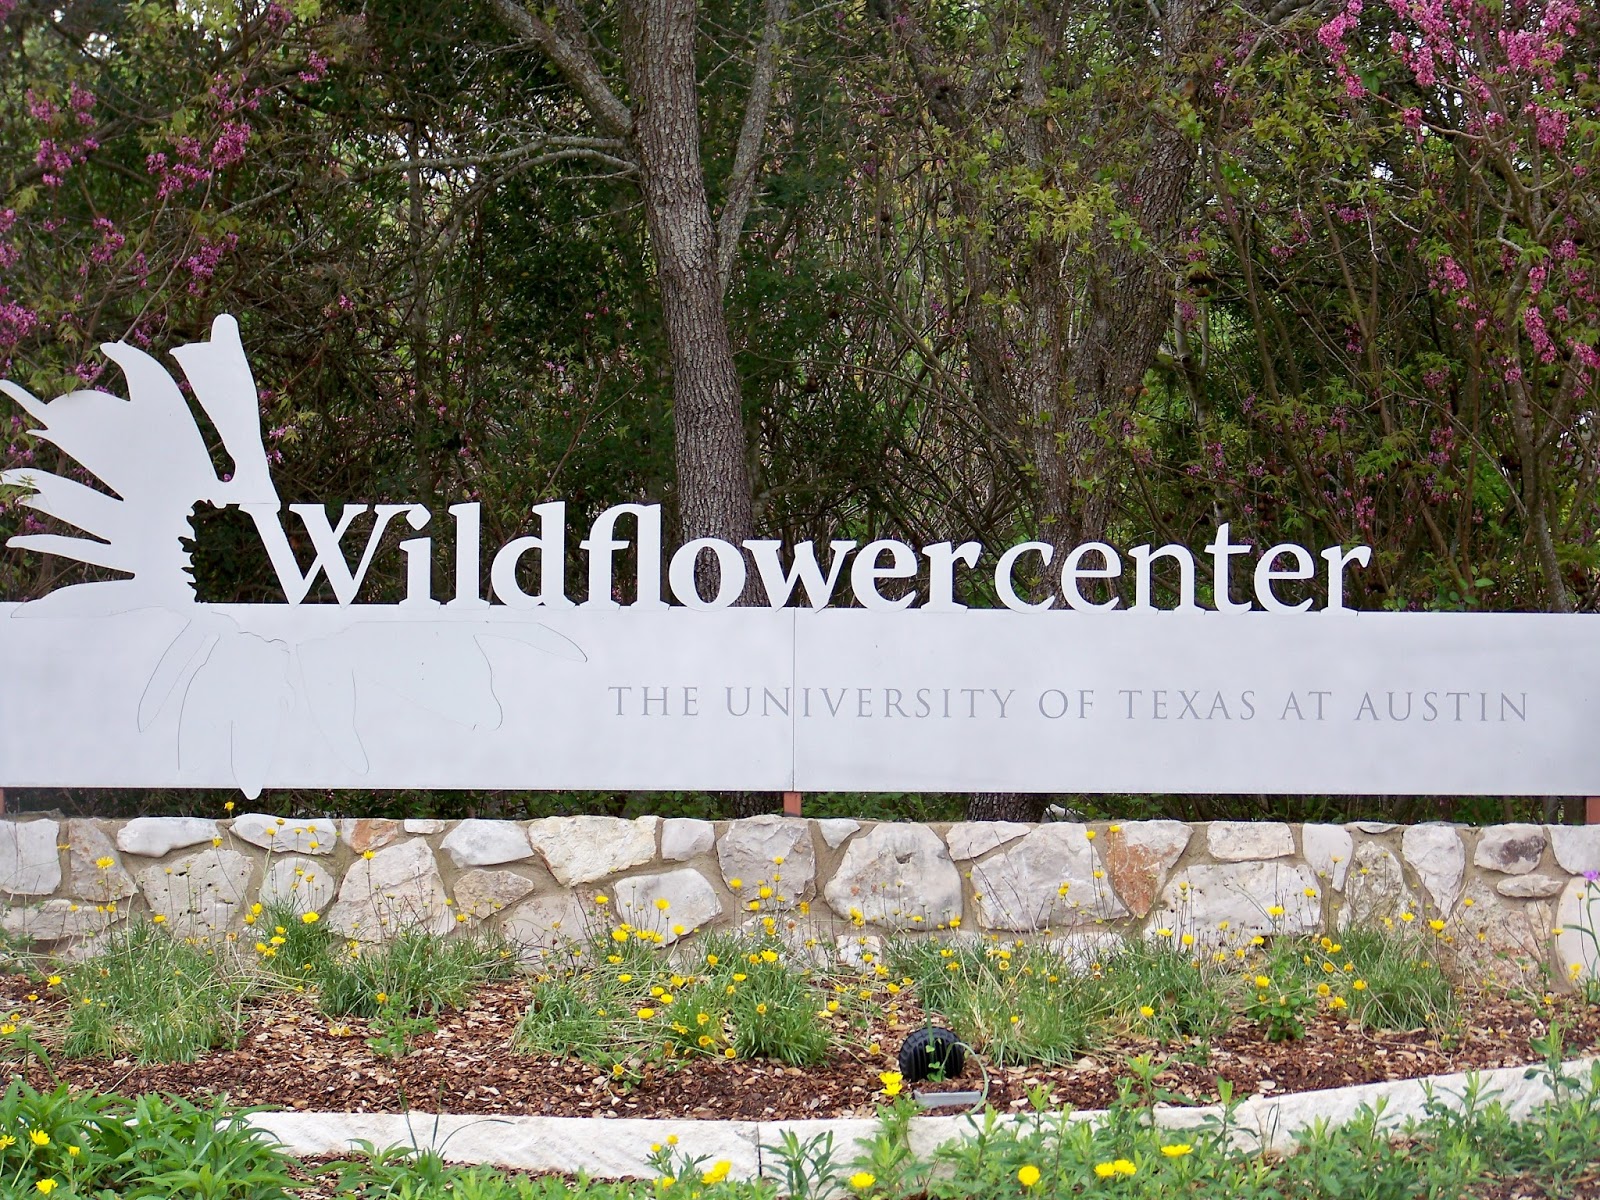 Lady Bird Johnson is responsible for all of the beautiful wildflowers we see in the Texas hill country. Learn more about the Lady Bird Wildflower Center and her beautifully illustrated book.